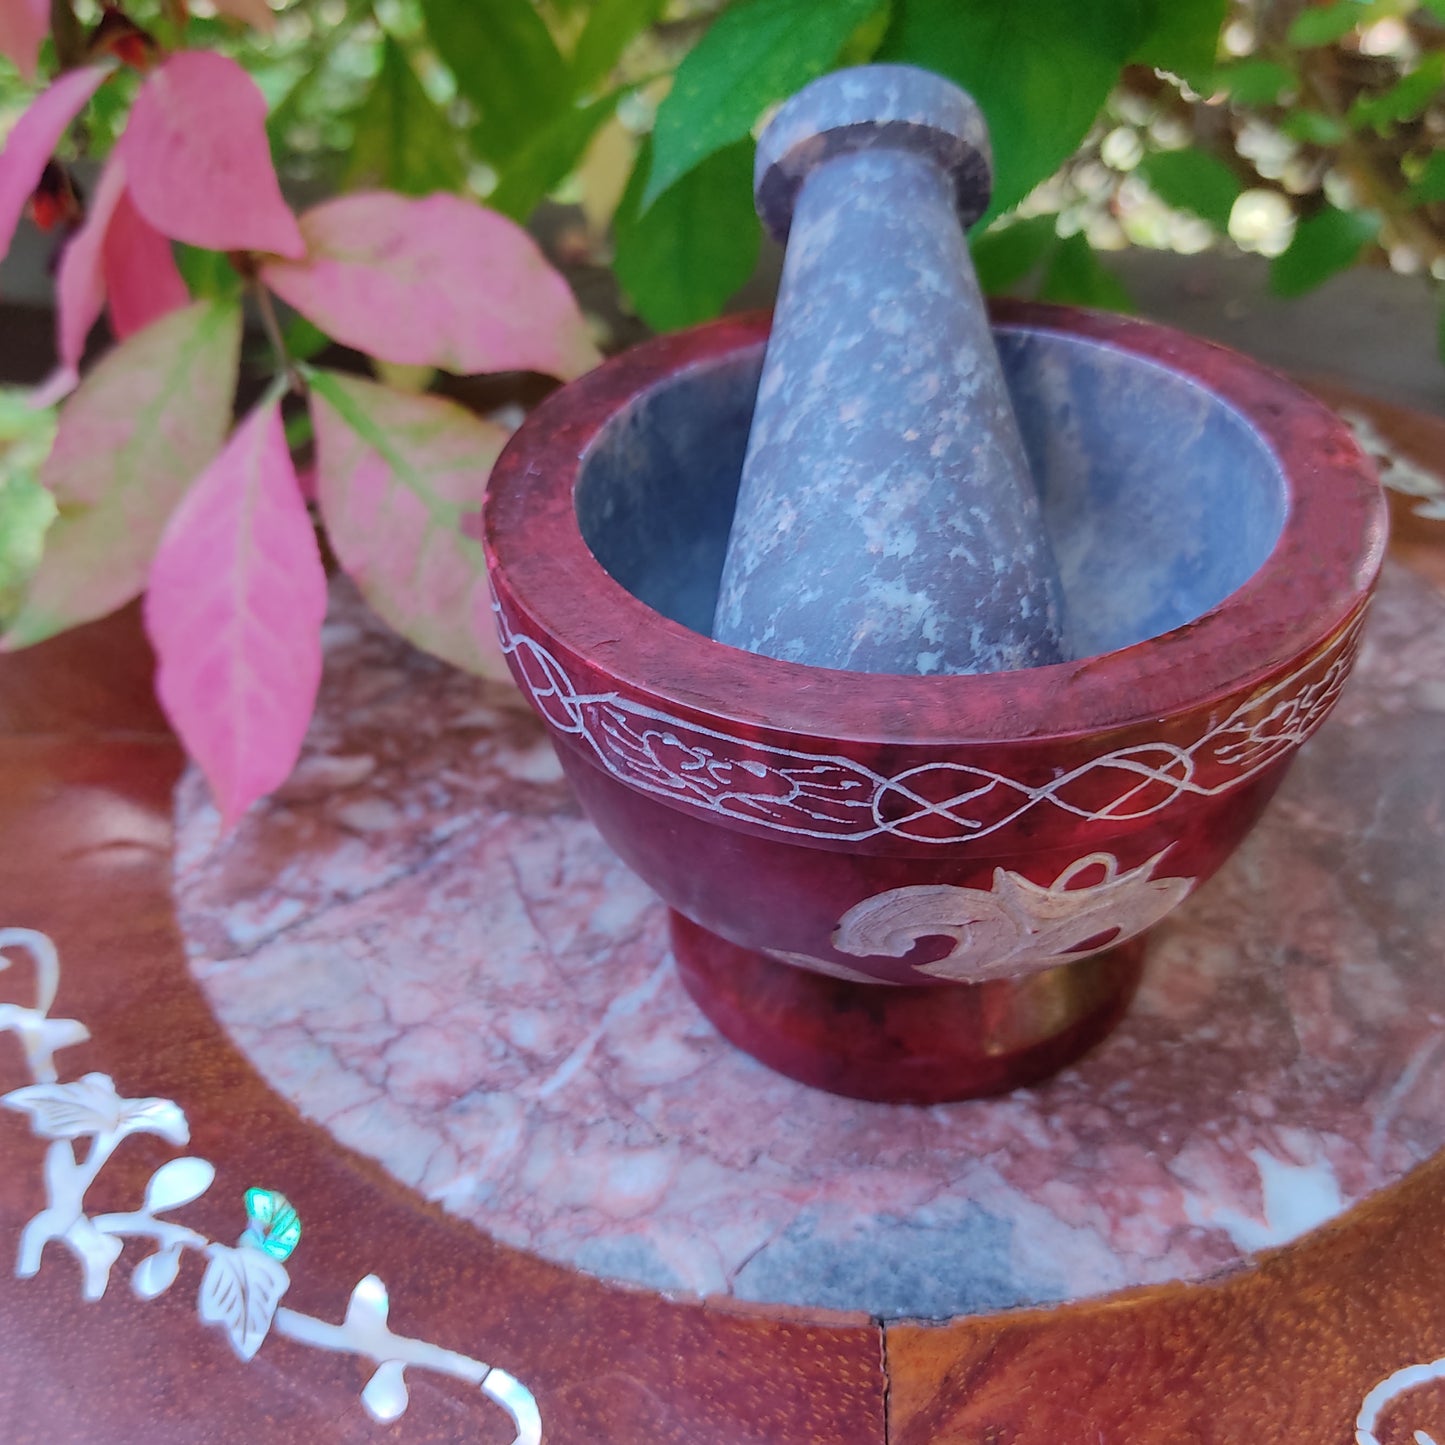 Red Soapstone Om Mortar and Pestle - Handmade - Absolutely Beautiful 3.5" Wide